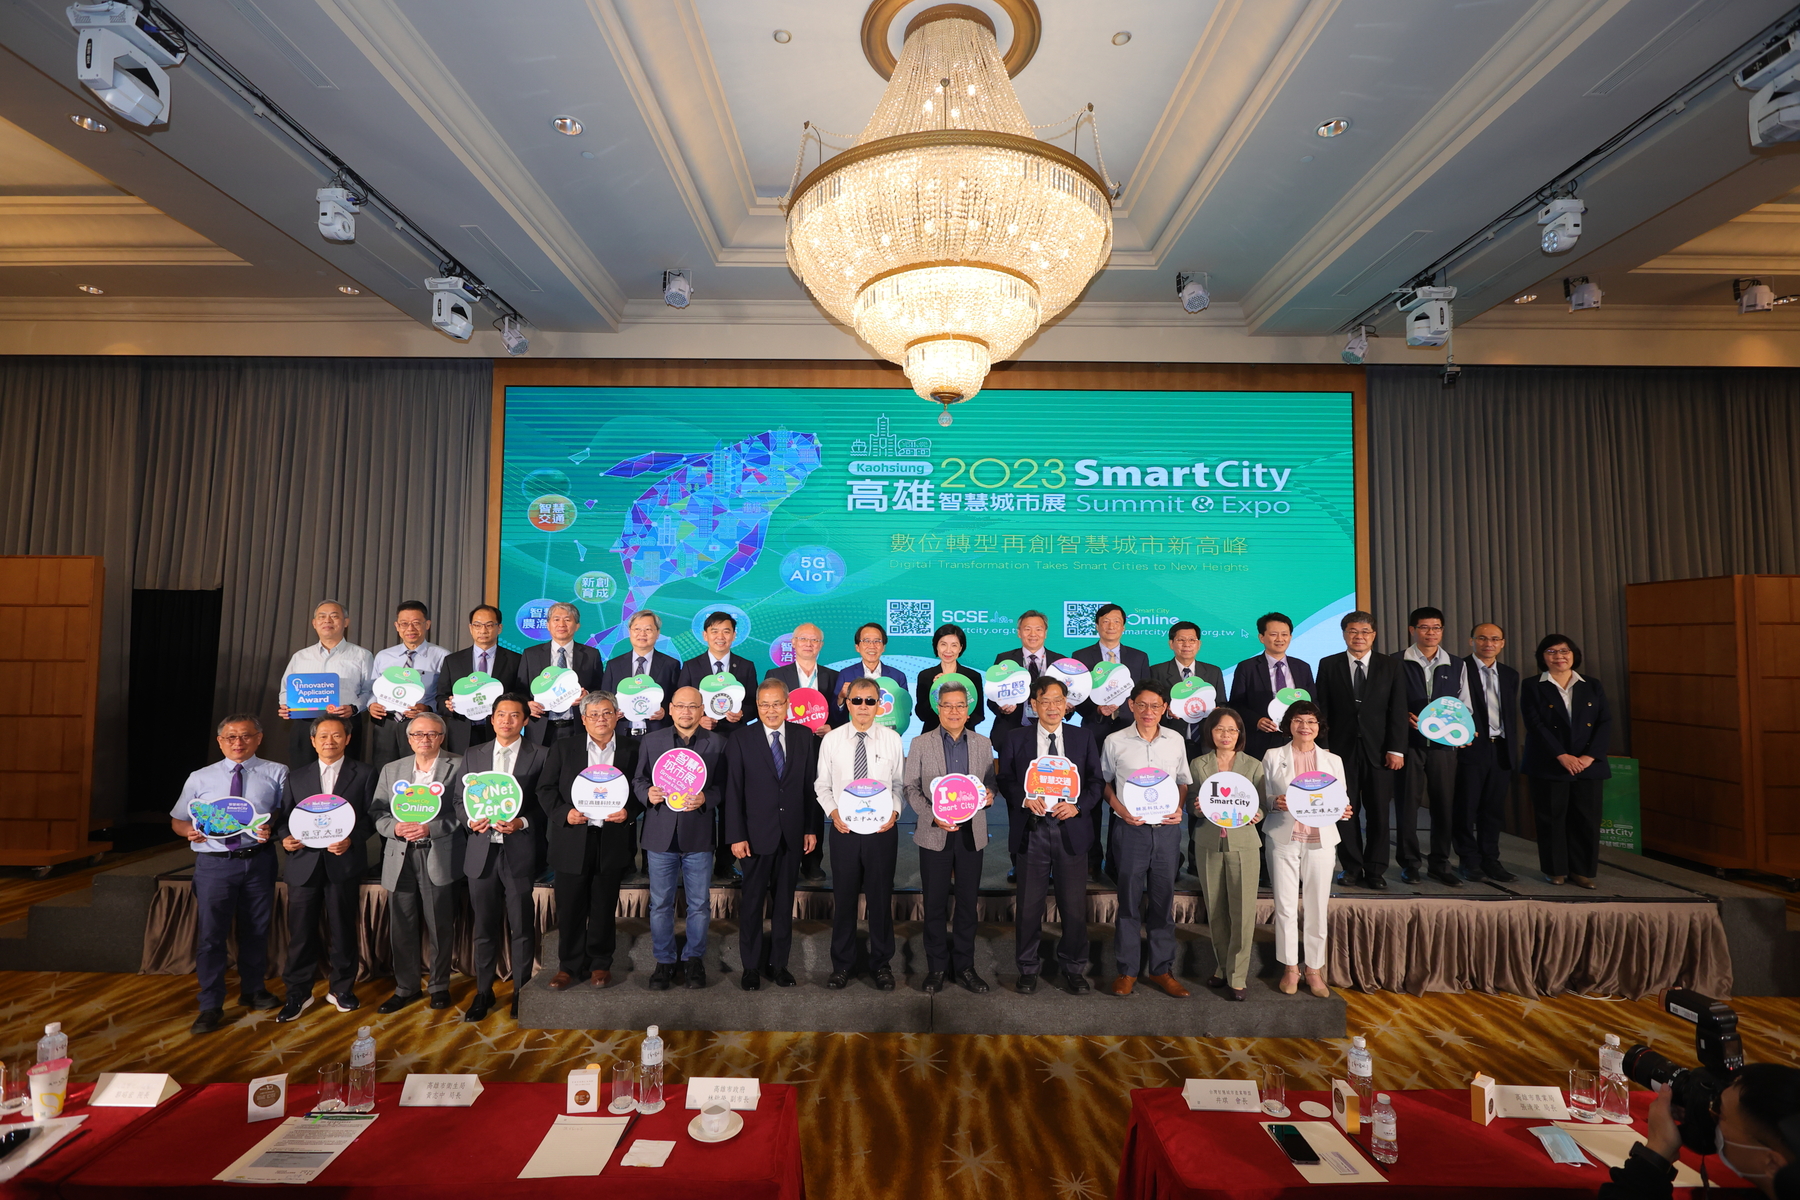 The guests of the second Kaohsiung Smart City Summit & Expo in Kaohsiung Exhibition Center